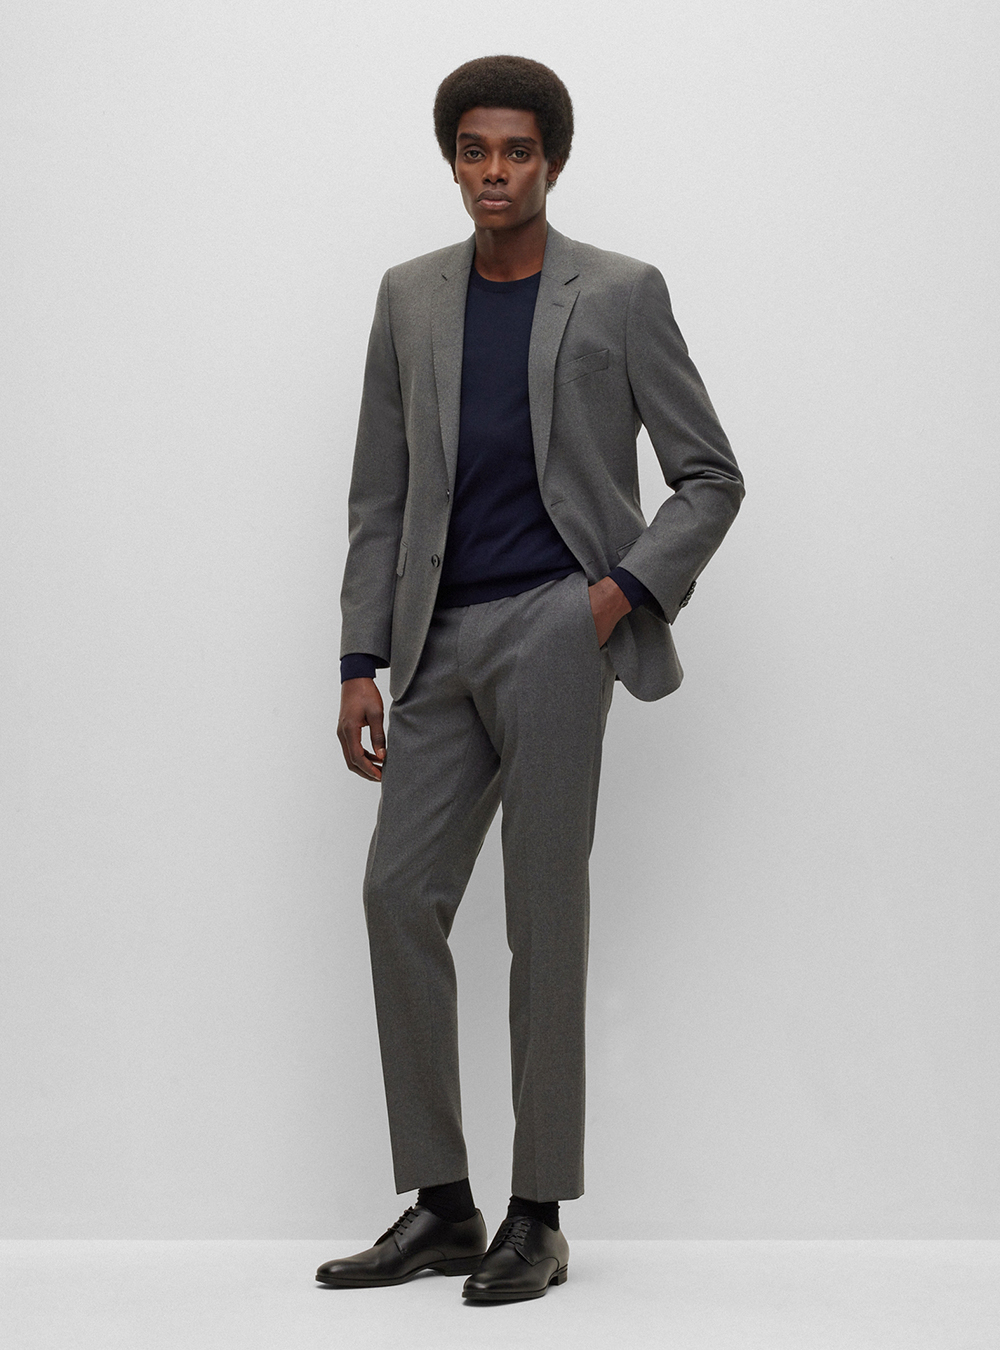 grey suit, navy crew neck sweater, and black derby shoes